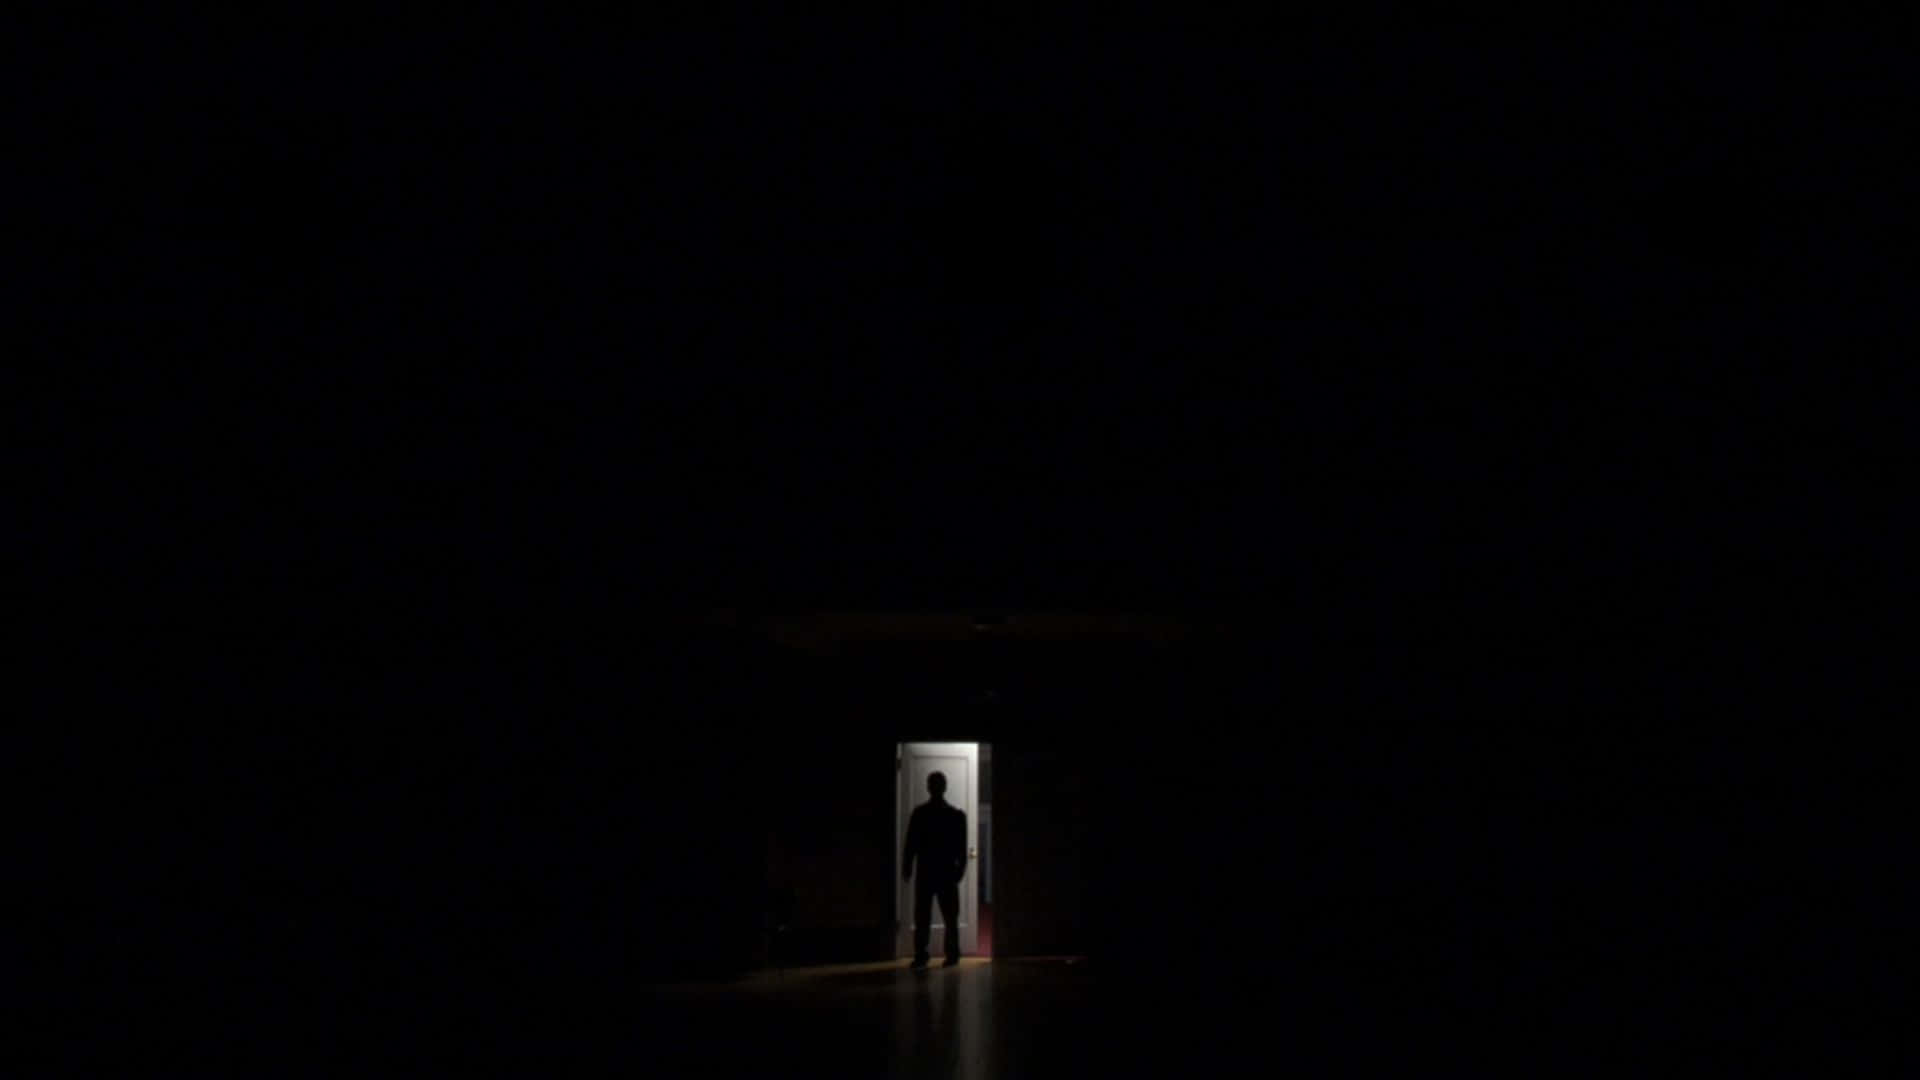 Mysterious Dark Room with a Single Light Source Wallpaper